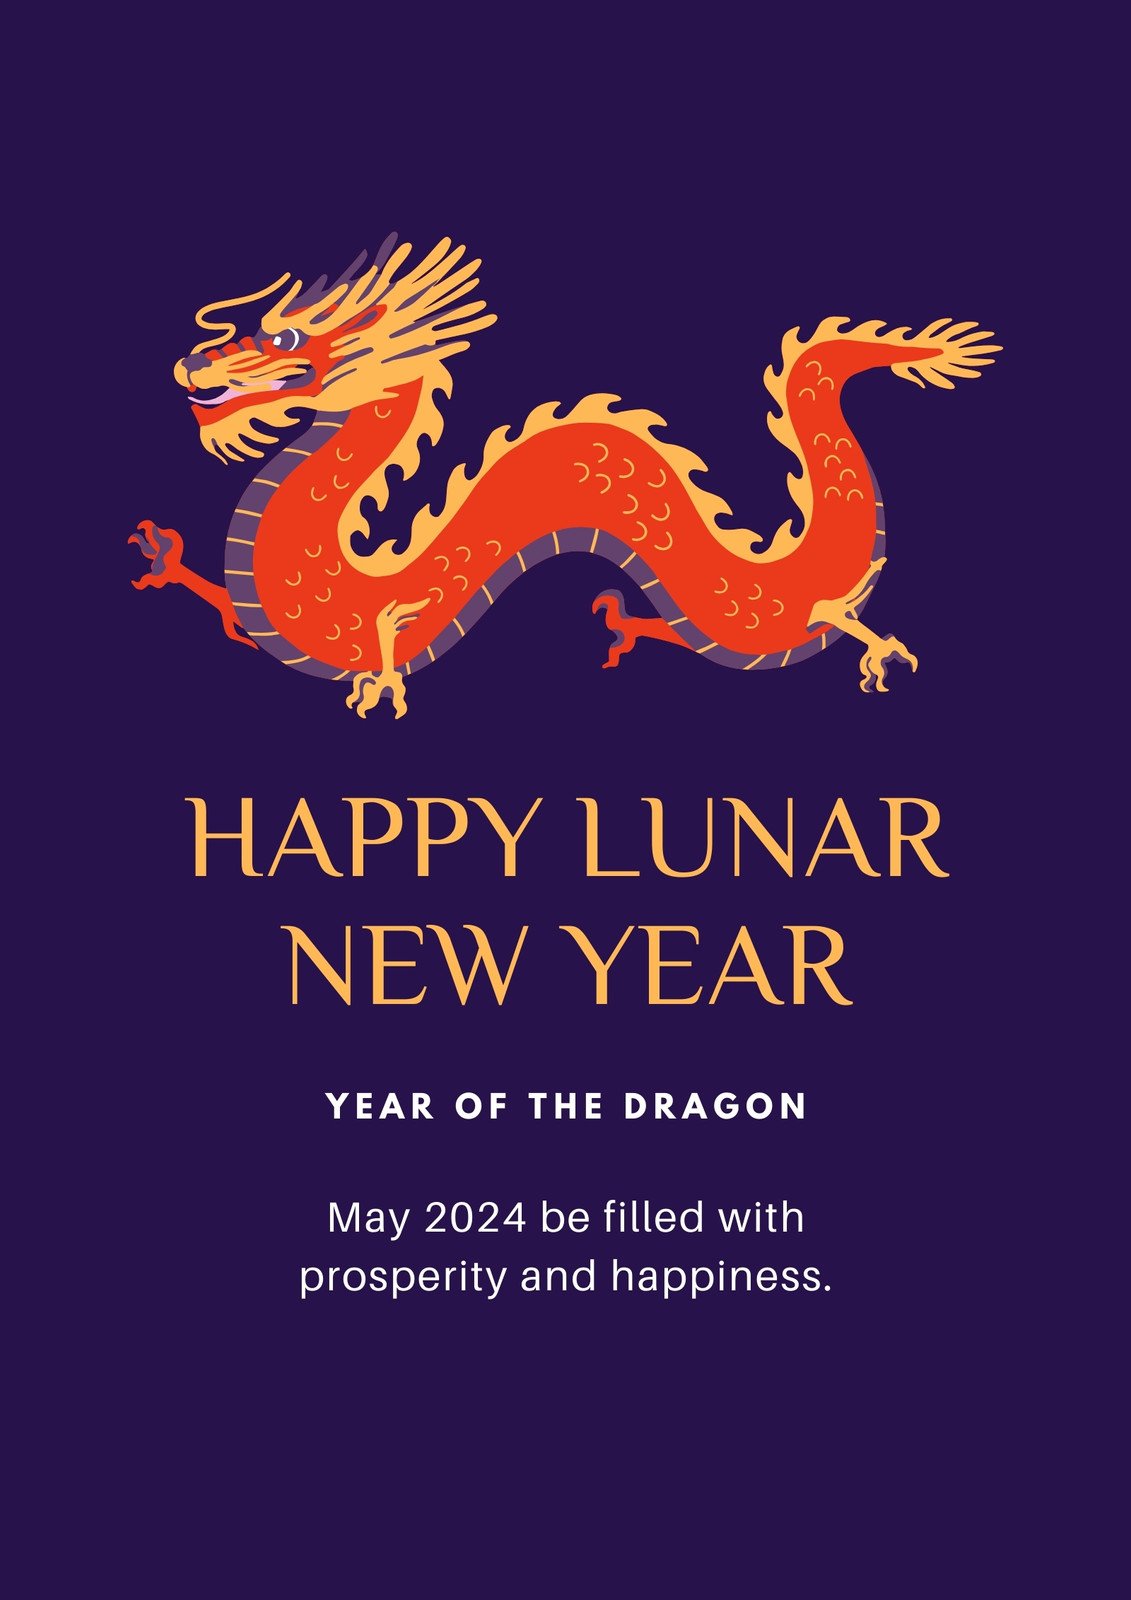 FREE Chinese New Year Banner Templates & Examples - Edit Online & Download